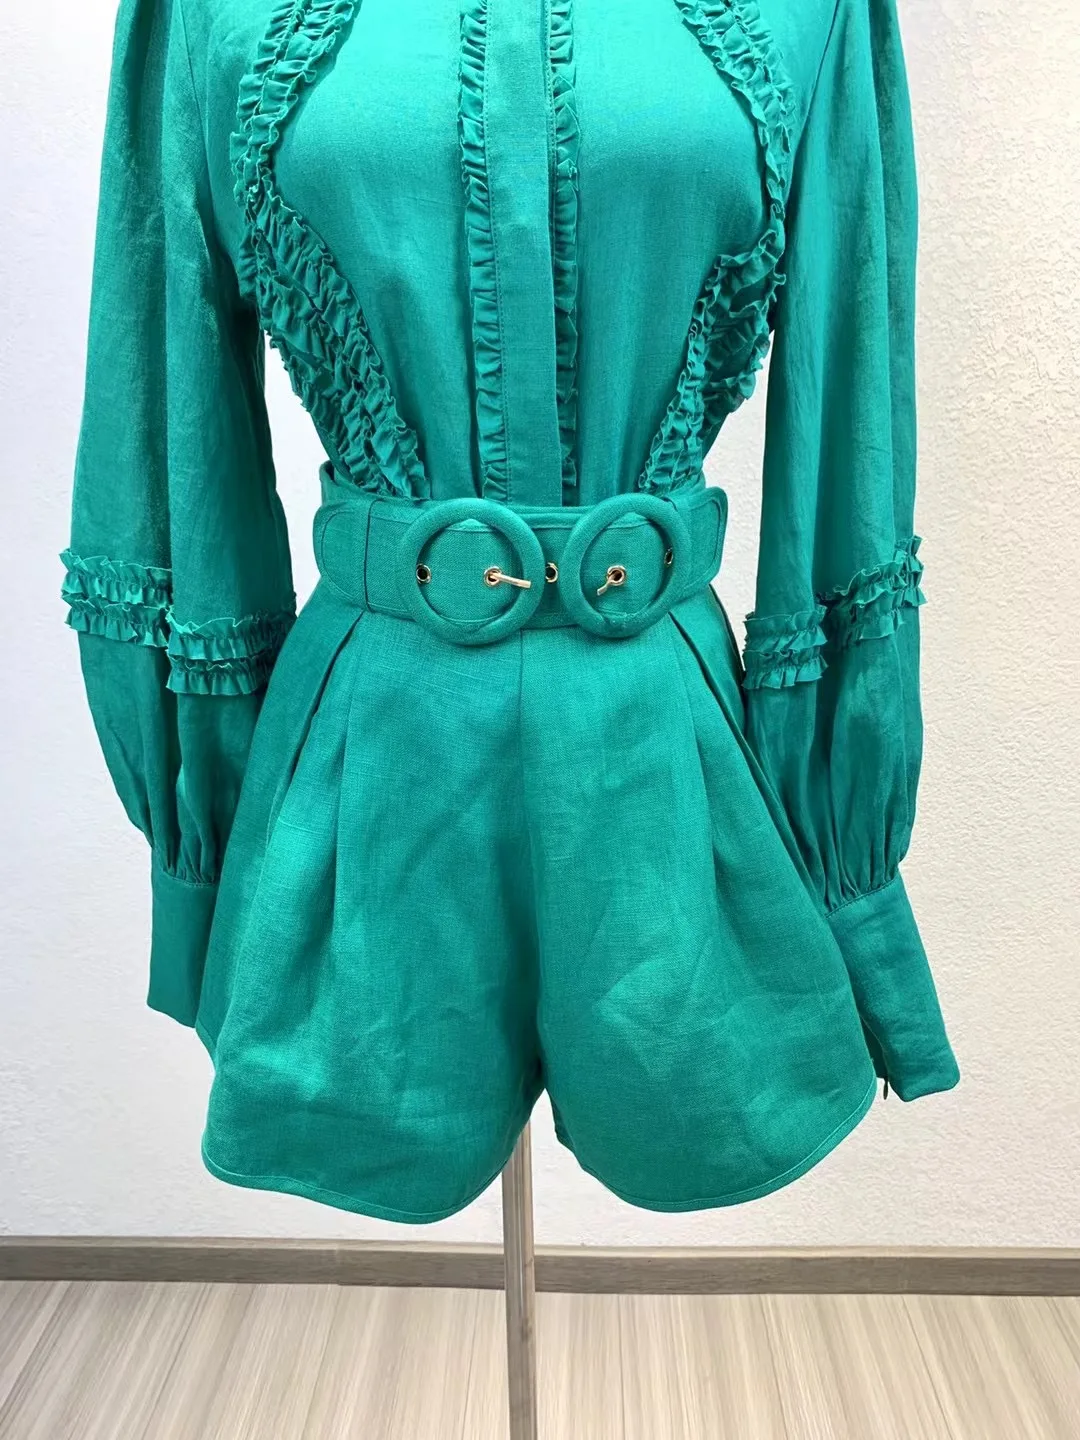 leather shorts Women Lantern Sleeve Green Ruffle Frill Ramie Blouse With Belted High Waist Shorts Two In One Set trendy clothes Shorts